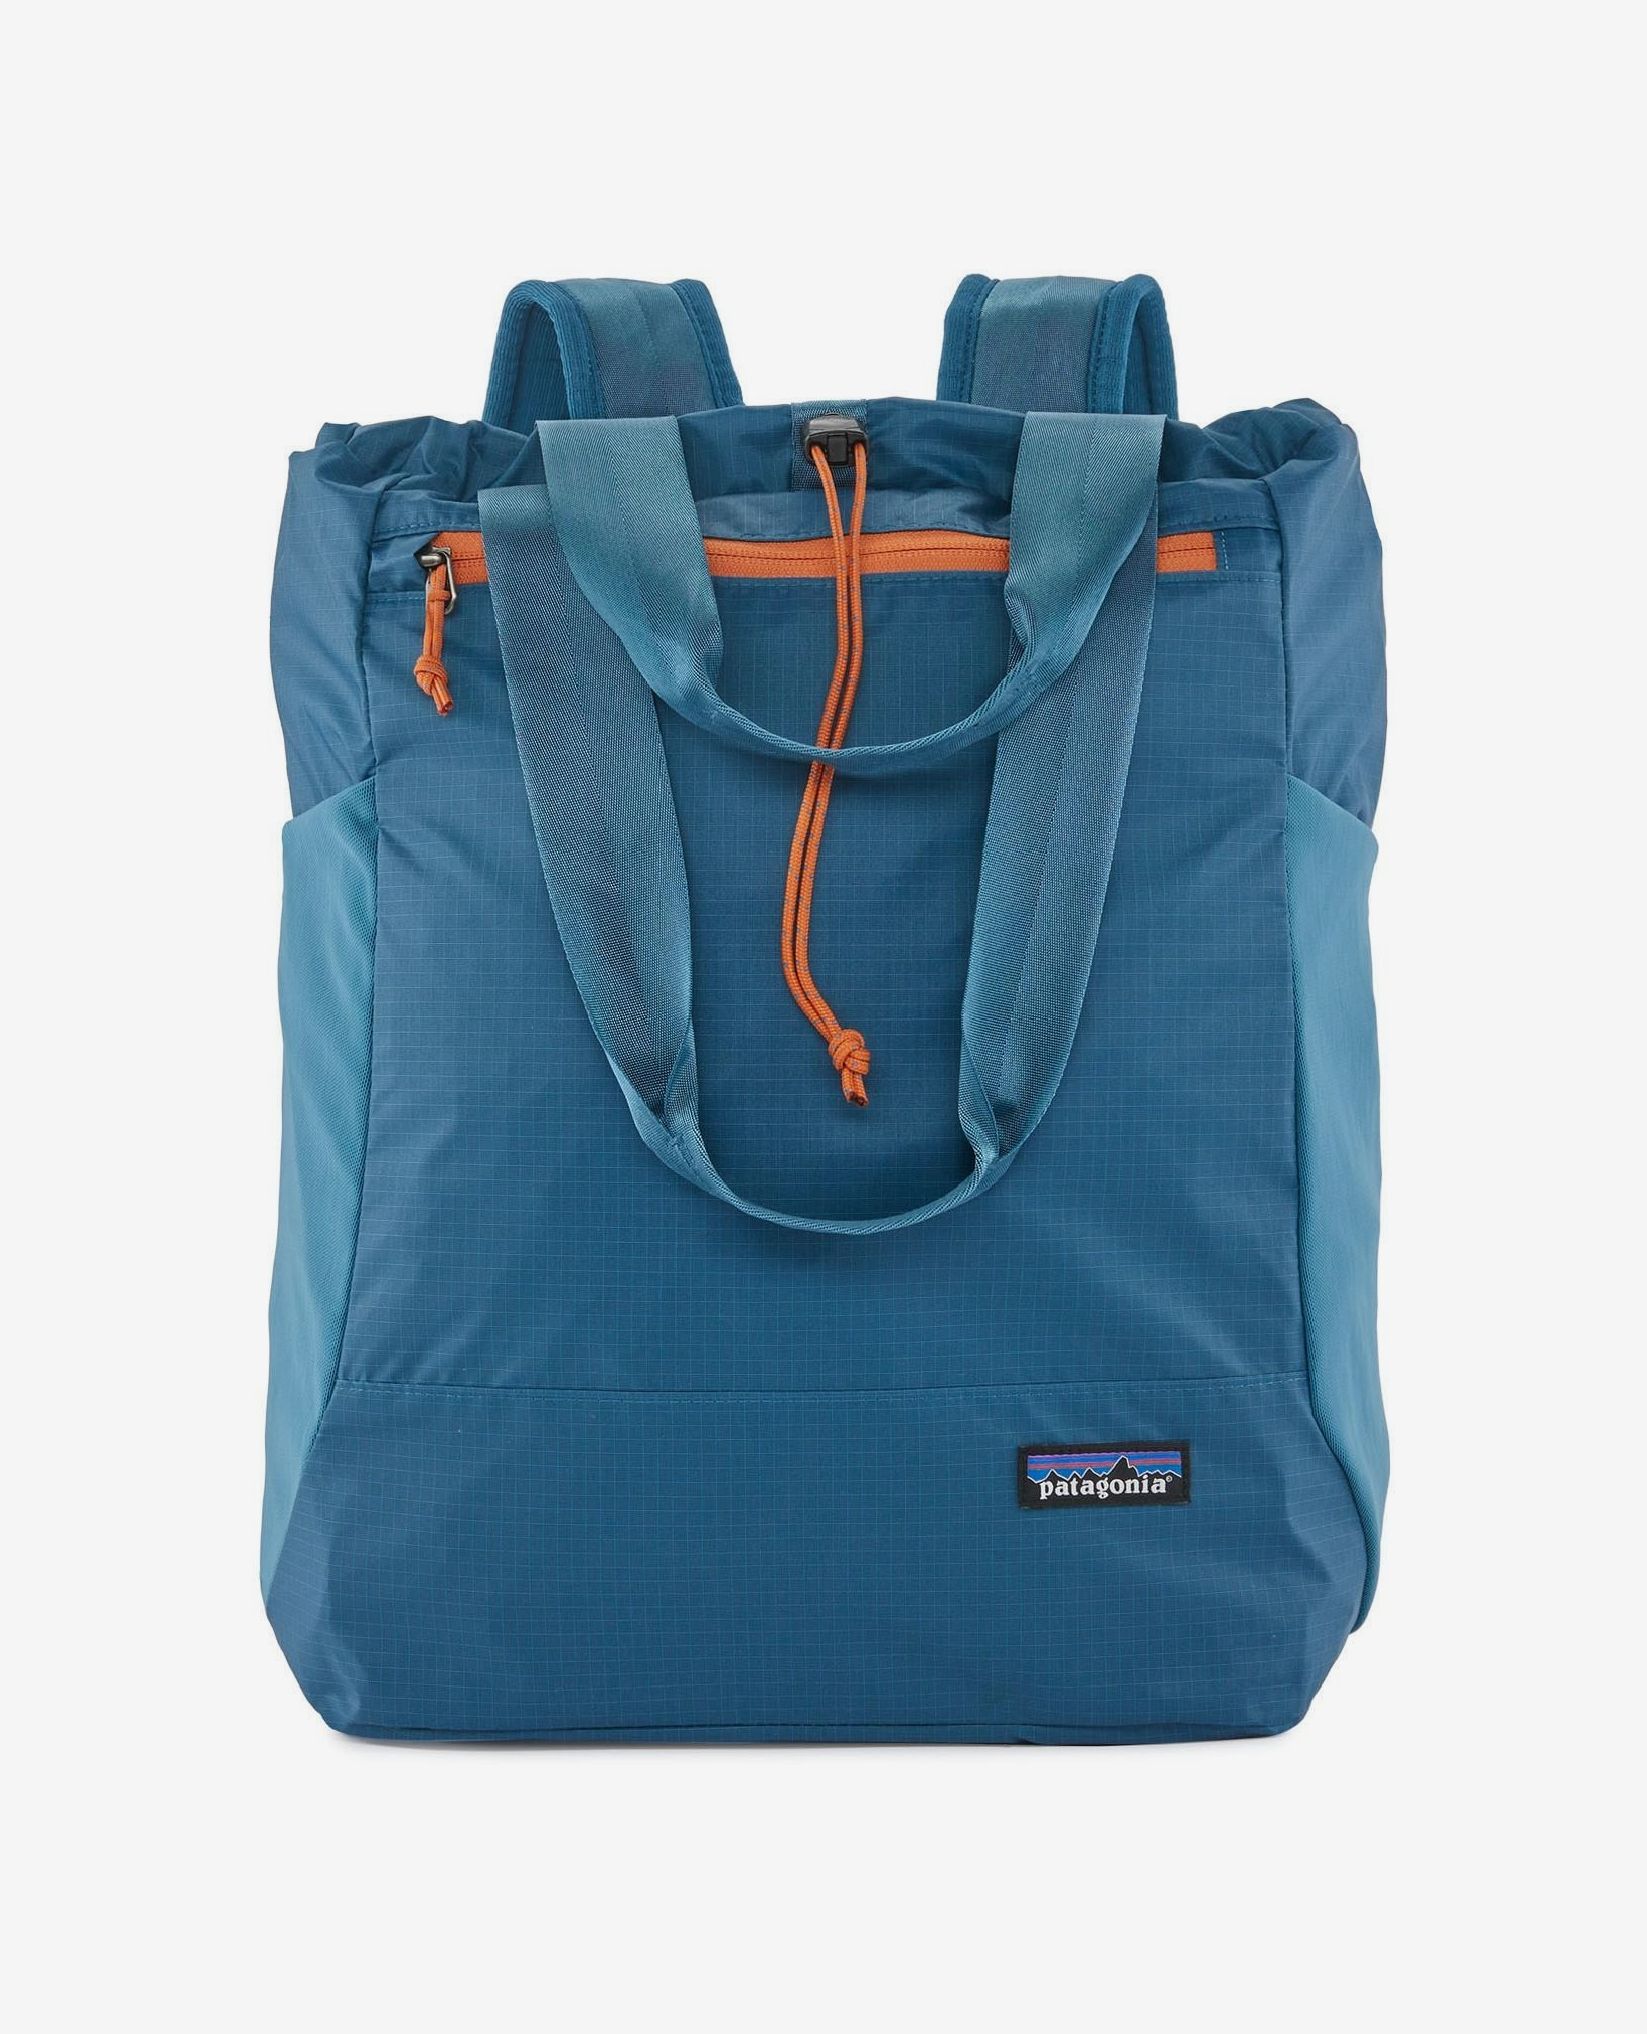 Art World's Favorite Patagonia UL Hole Tote Pack | The Strategist